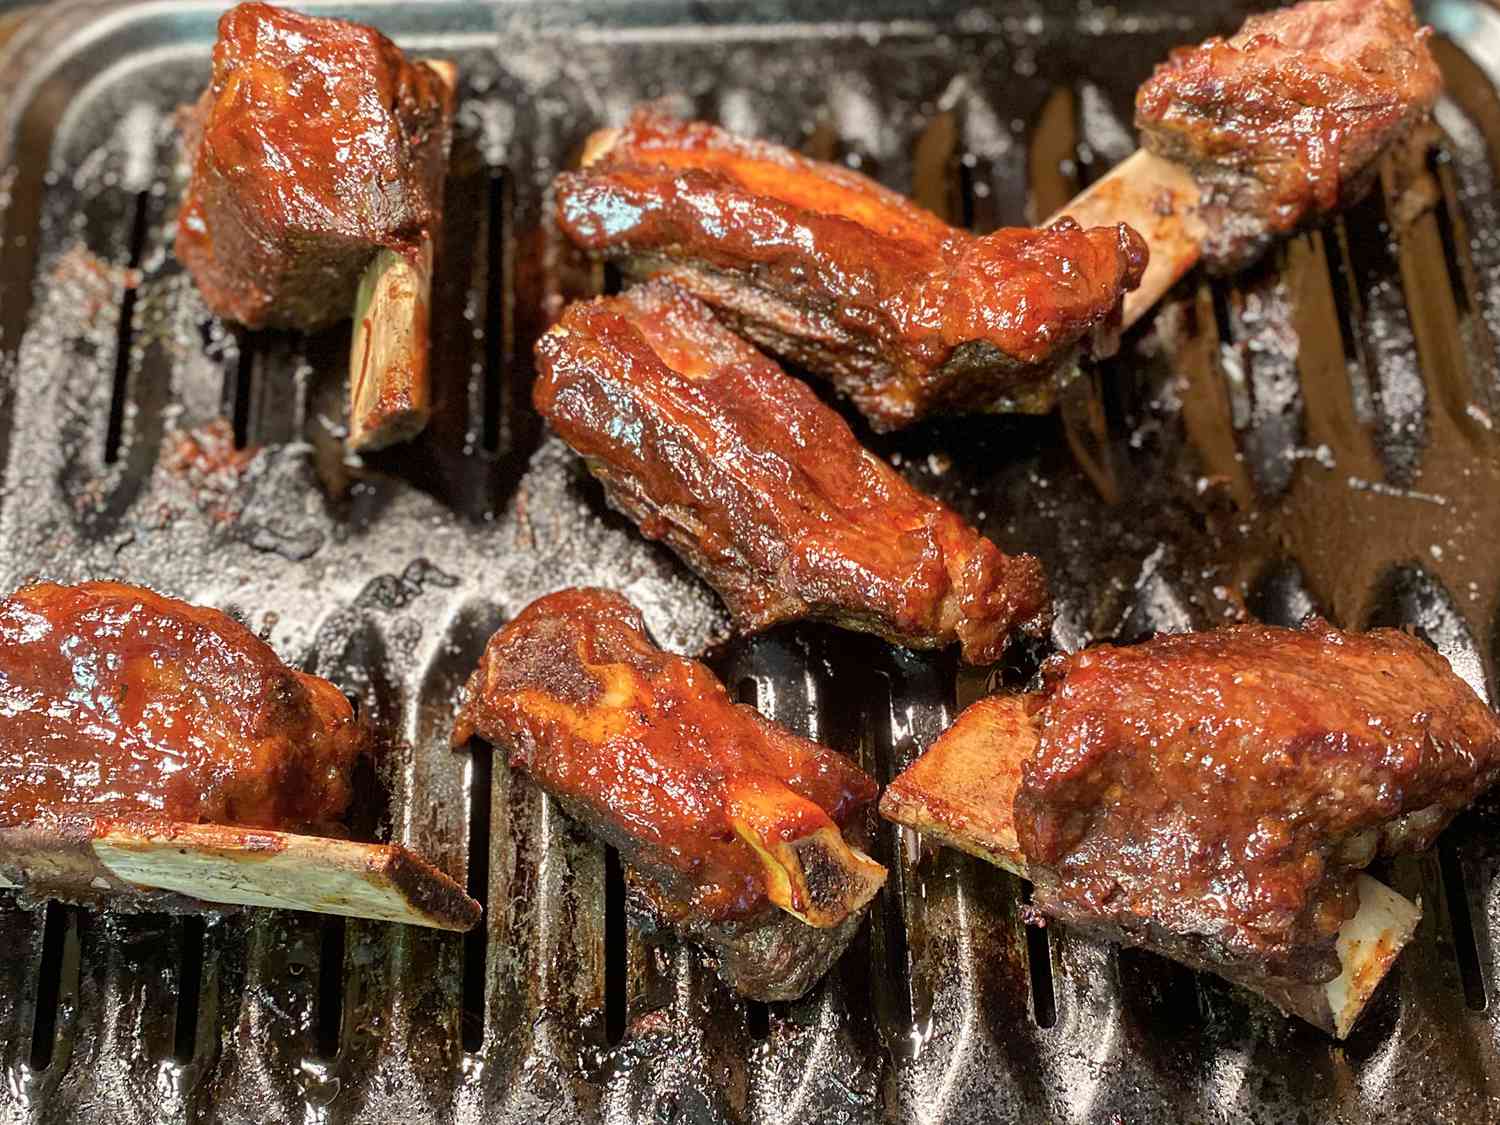 Close up view of Broiled Short Ribs on a broiler